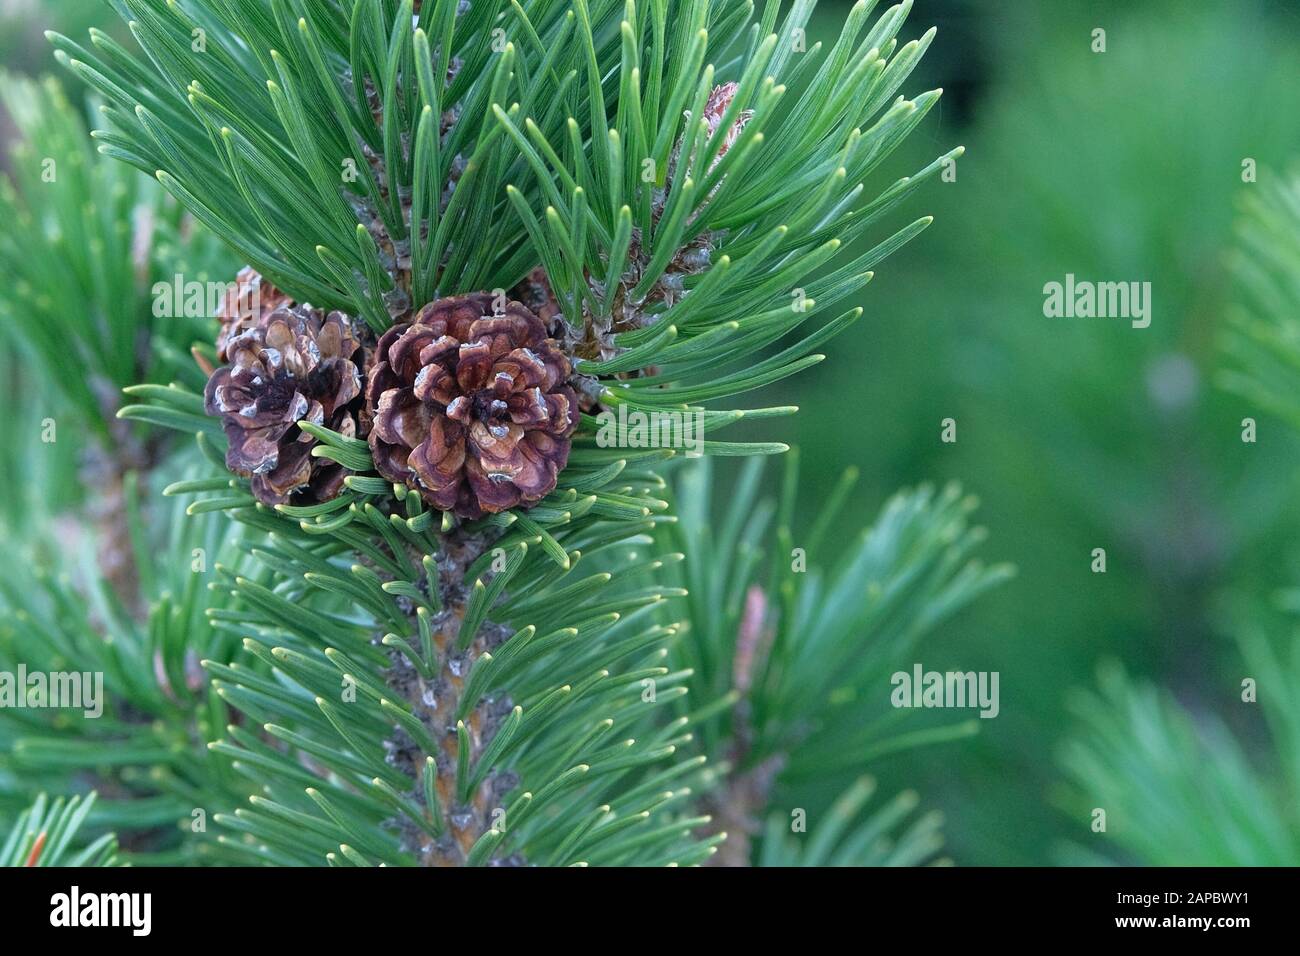 Green fresh fir branch with cones in forest on blurred background. Christmas tree branches. Stock Photo